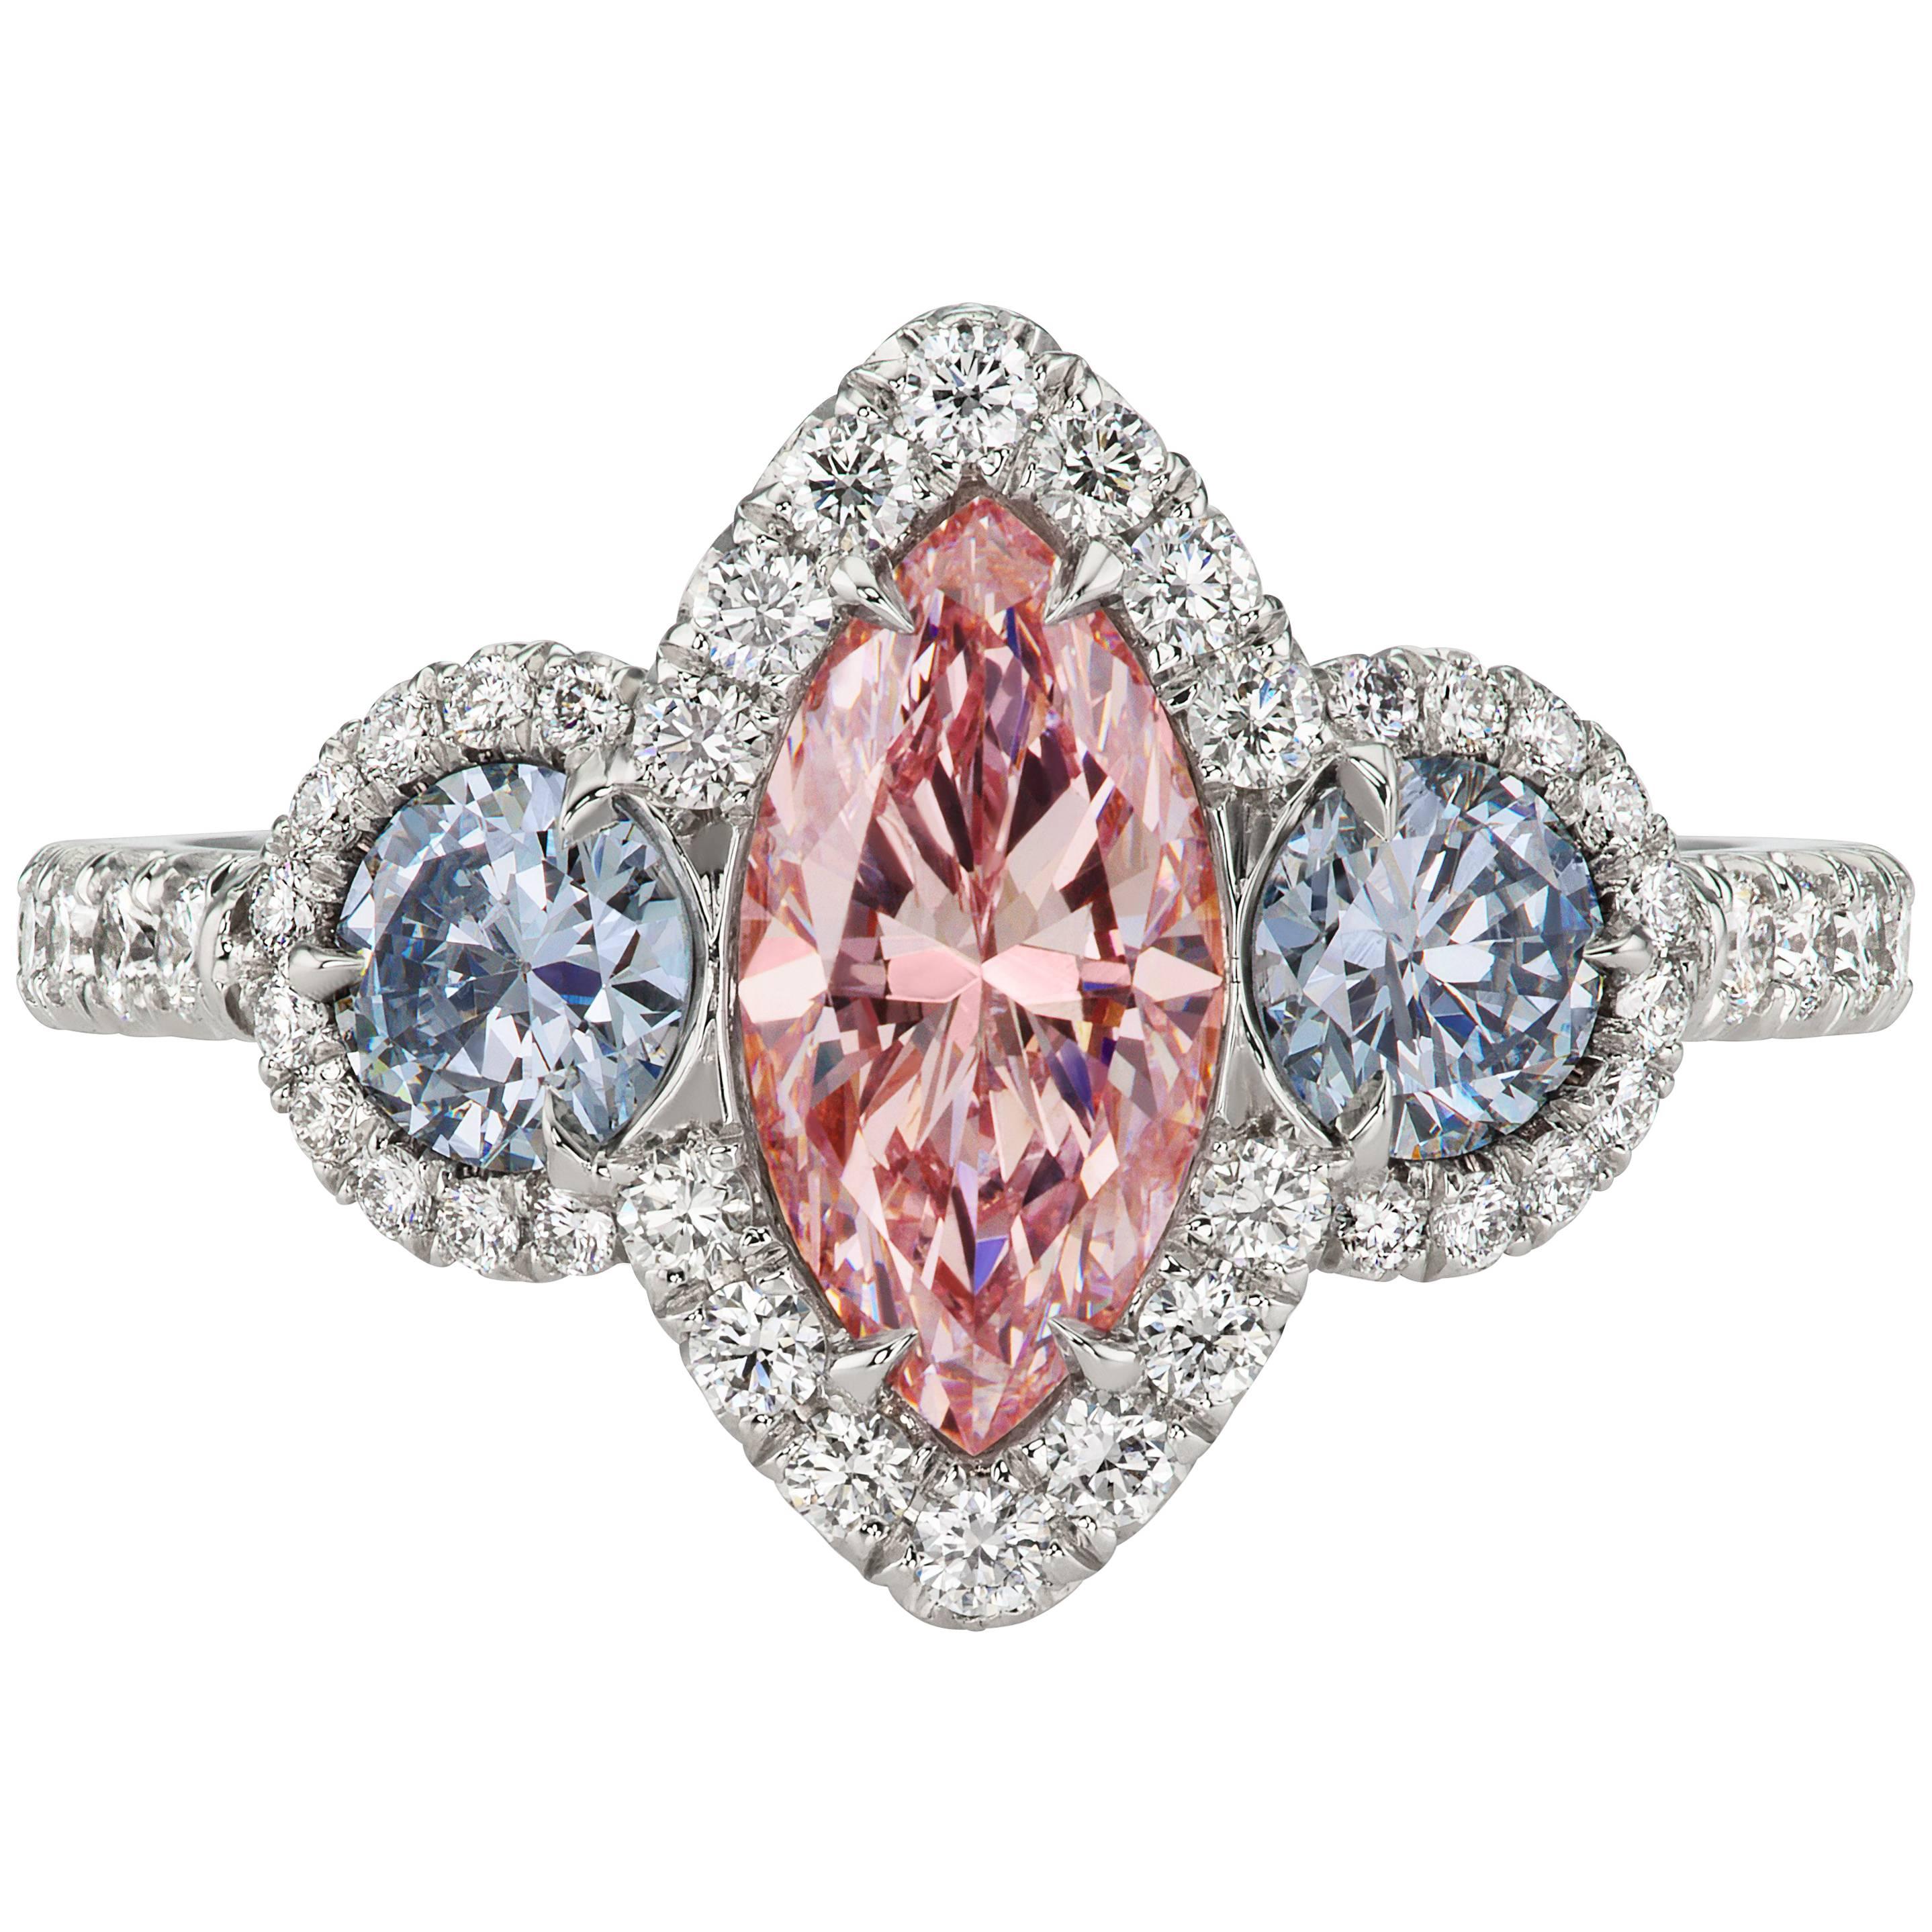 GIA Certified Fancy Color Diamond Ring